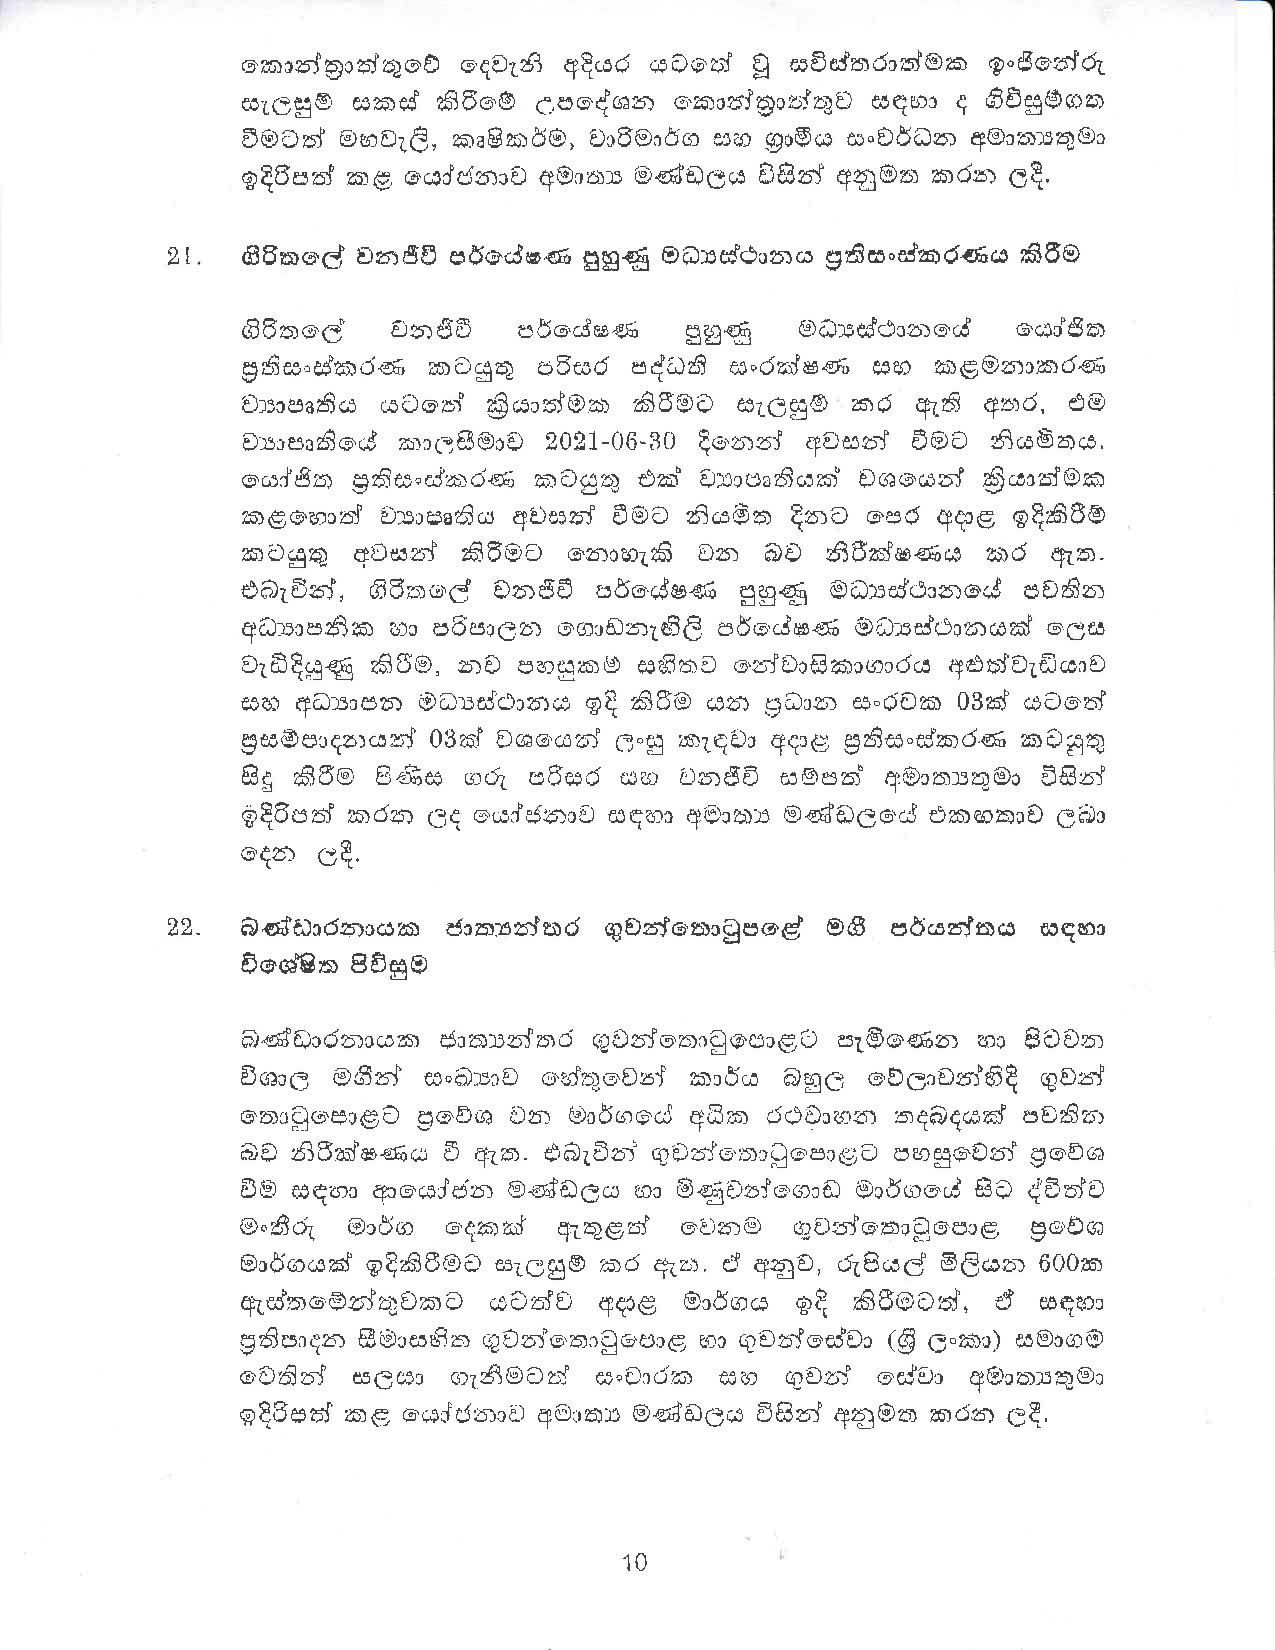 Cabinet Decision on 05.02.2020 page 010